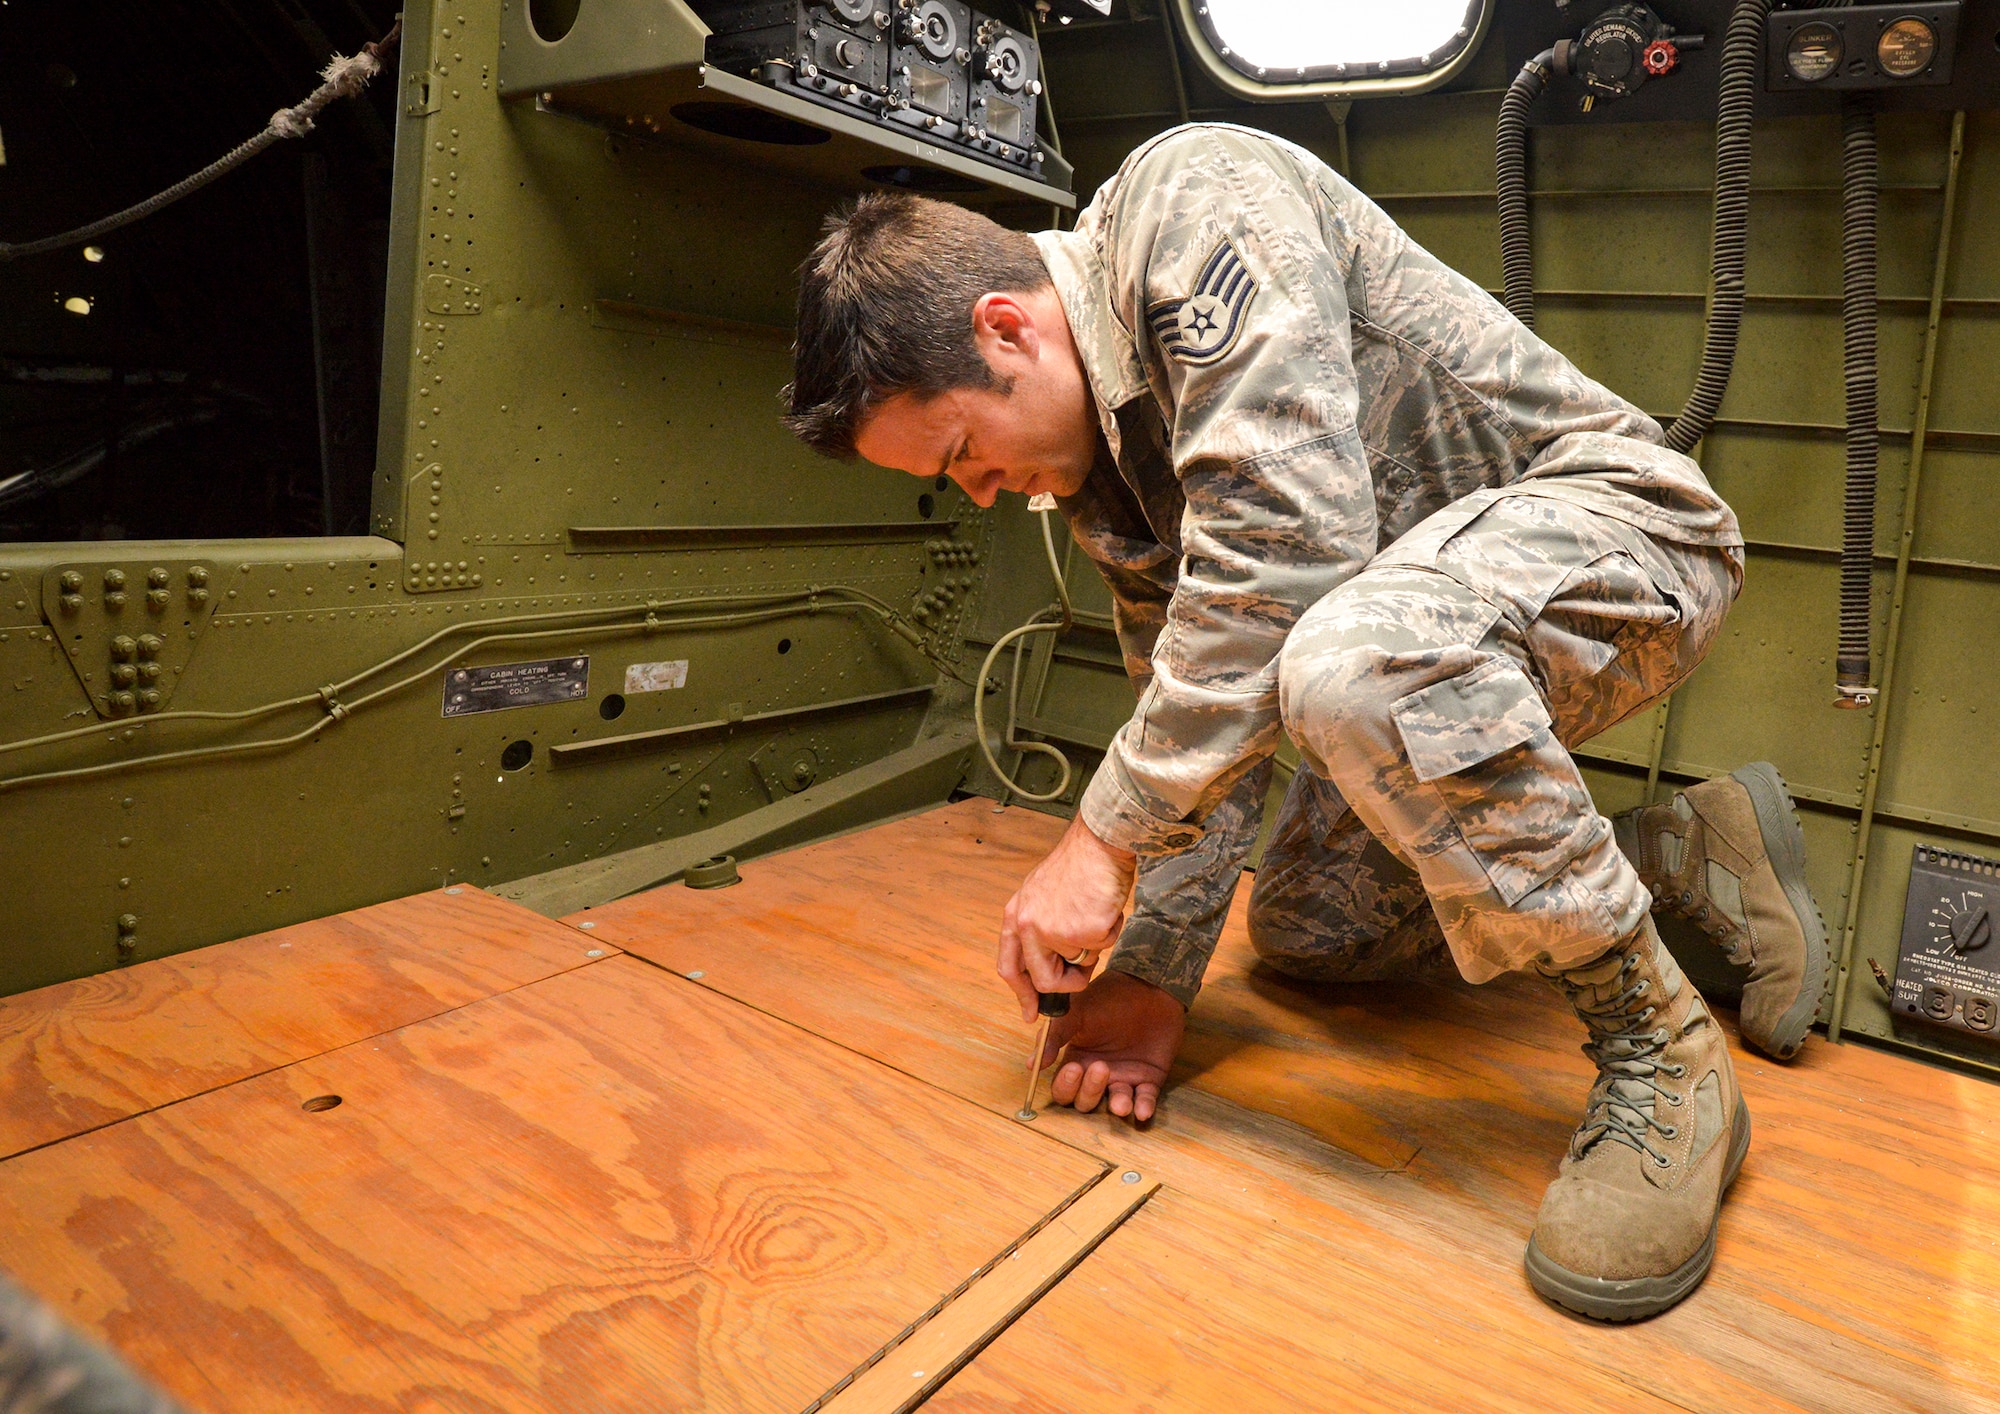 Tech Sgt. Garrett Hulett, Barksdale Global Power Musuem Non-Commissioned Officer in Charge, works on flooring in the interior of the museum’s B-17 Flying Fortress. Hulett maintains the air park’s 20 static displays, including 17 aircraft that span from a World War II B-24 Liberator to an SR-71 Blackbird. (U.S. Air Force photo/Airman 1st Class Mozer O. Da Cunha)